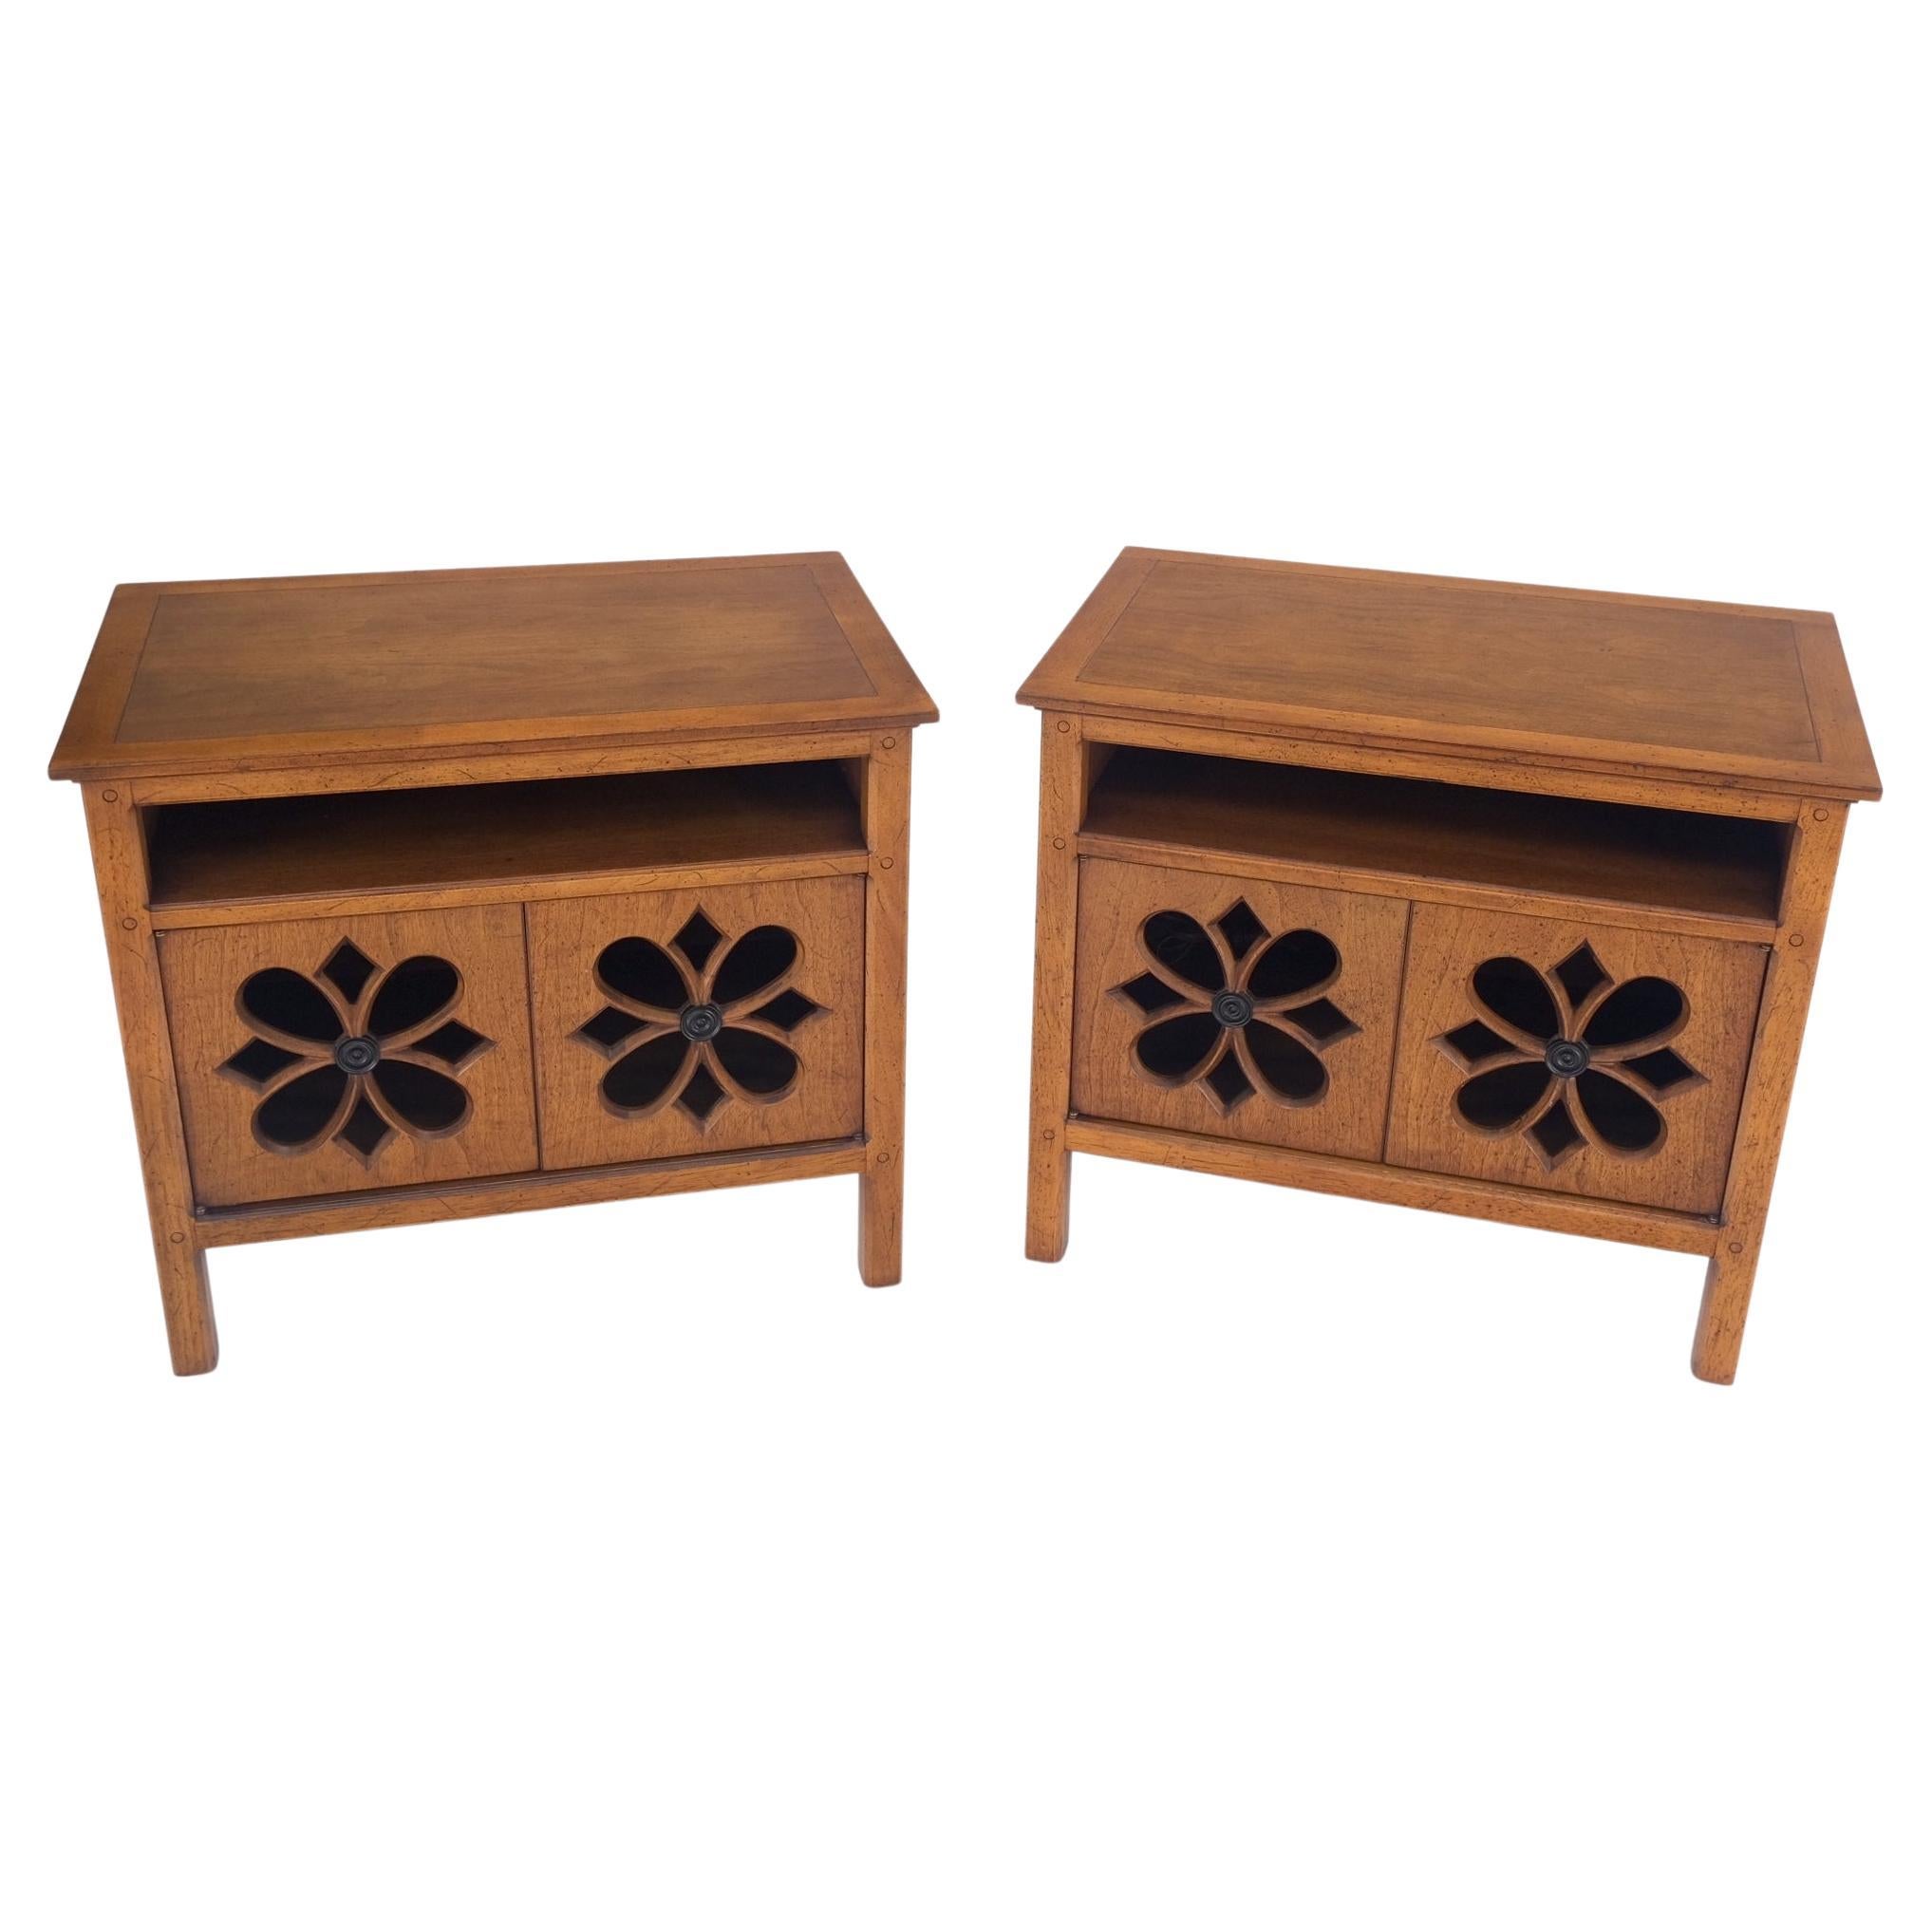 Pair Double Door Pierced Carved Doors Compartment Night Stands End Tables Mint